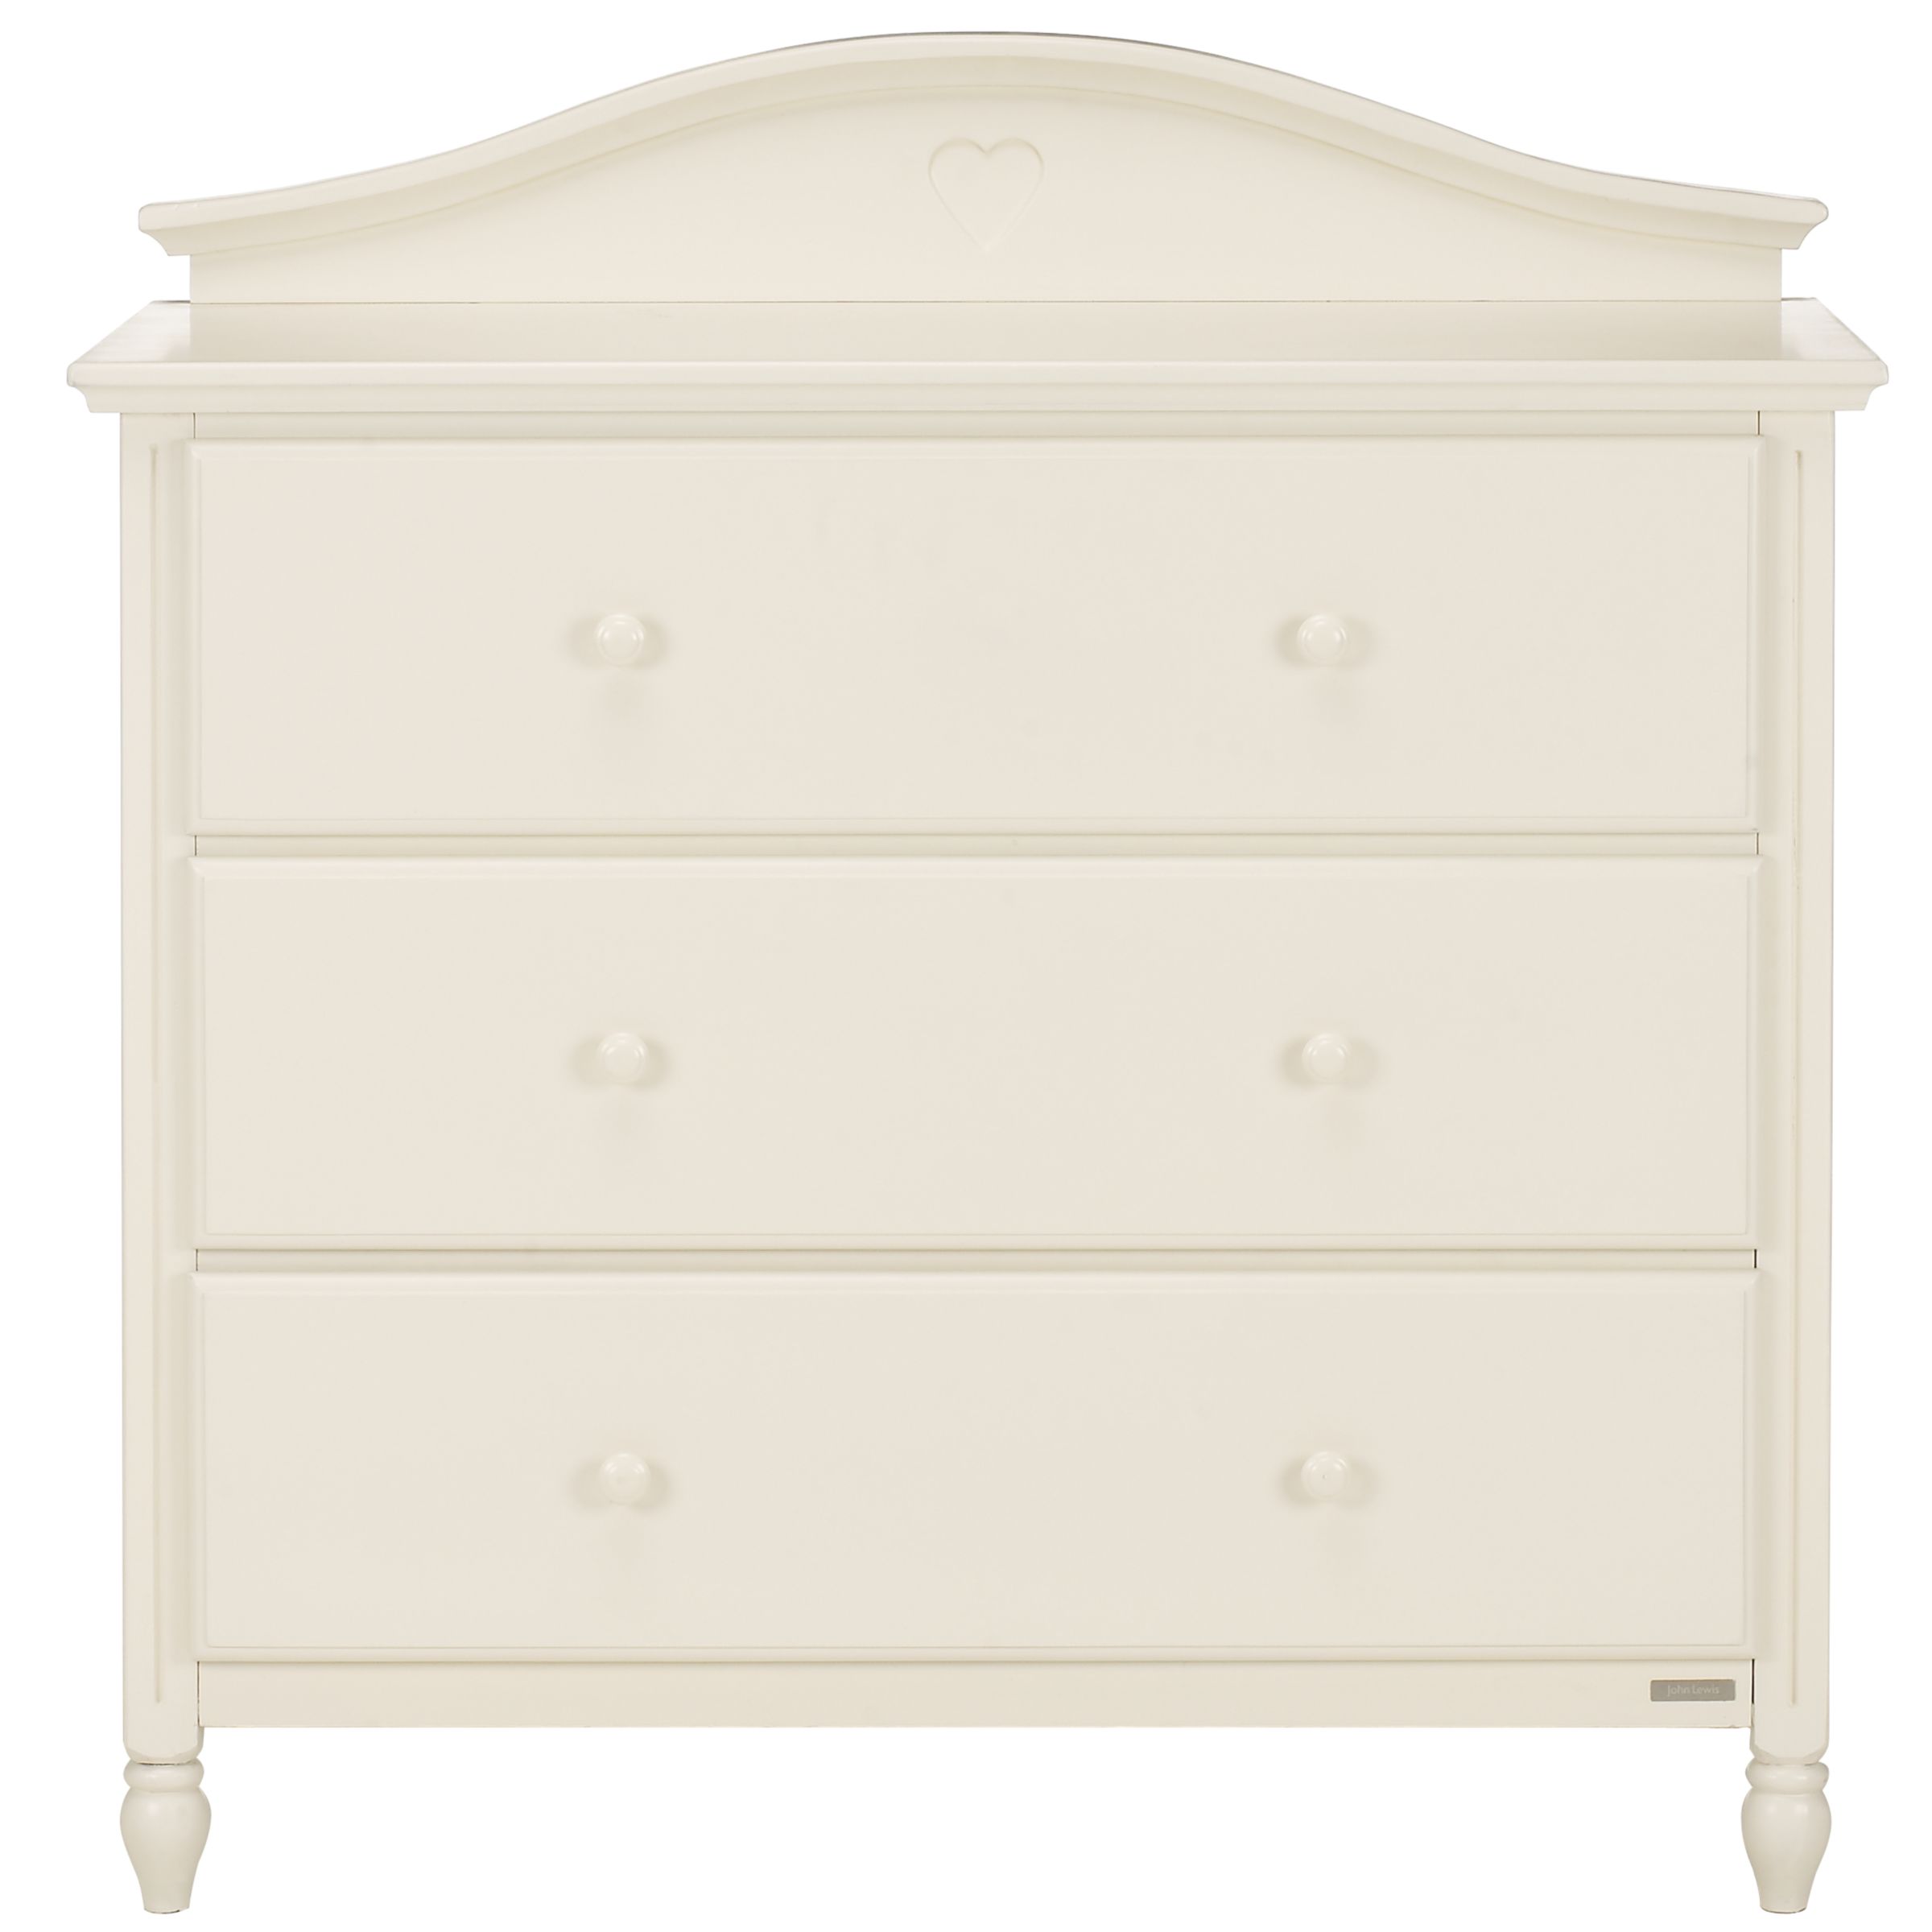 John Lewis Hearts Chest of Drawers, Ivory